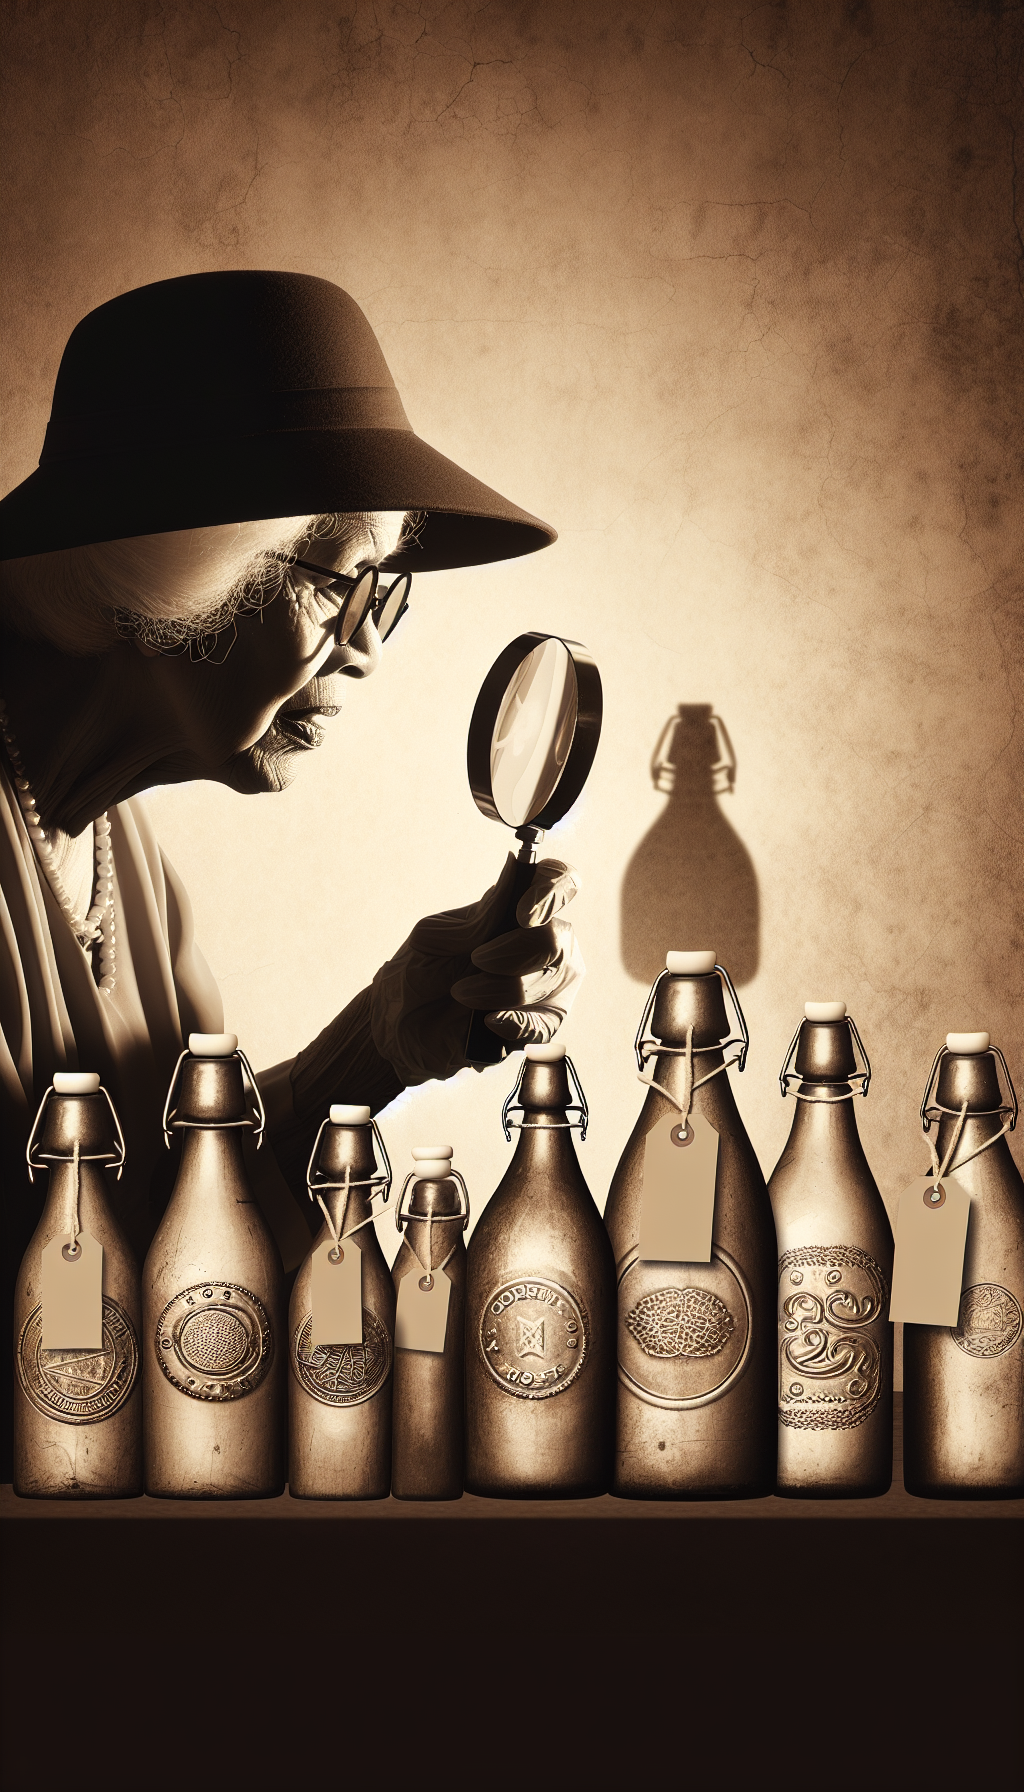 A whimsical, sepia-toned illustration depicts a detective magnifying glass in hand, scrutinizing a lineup of antique milk bottles bearing various embossed markings, each with a price tag dangling to signify their values. The shadow of the detective reveals a mysterious figure resembling a vintage milkman, symbolizing the search for the bottles' origins and authenticity.